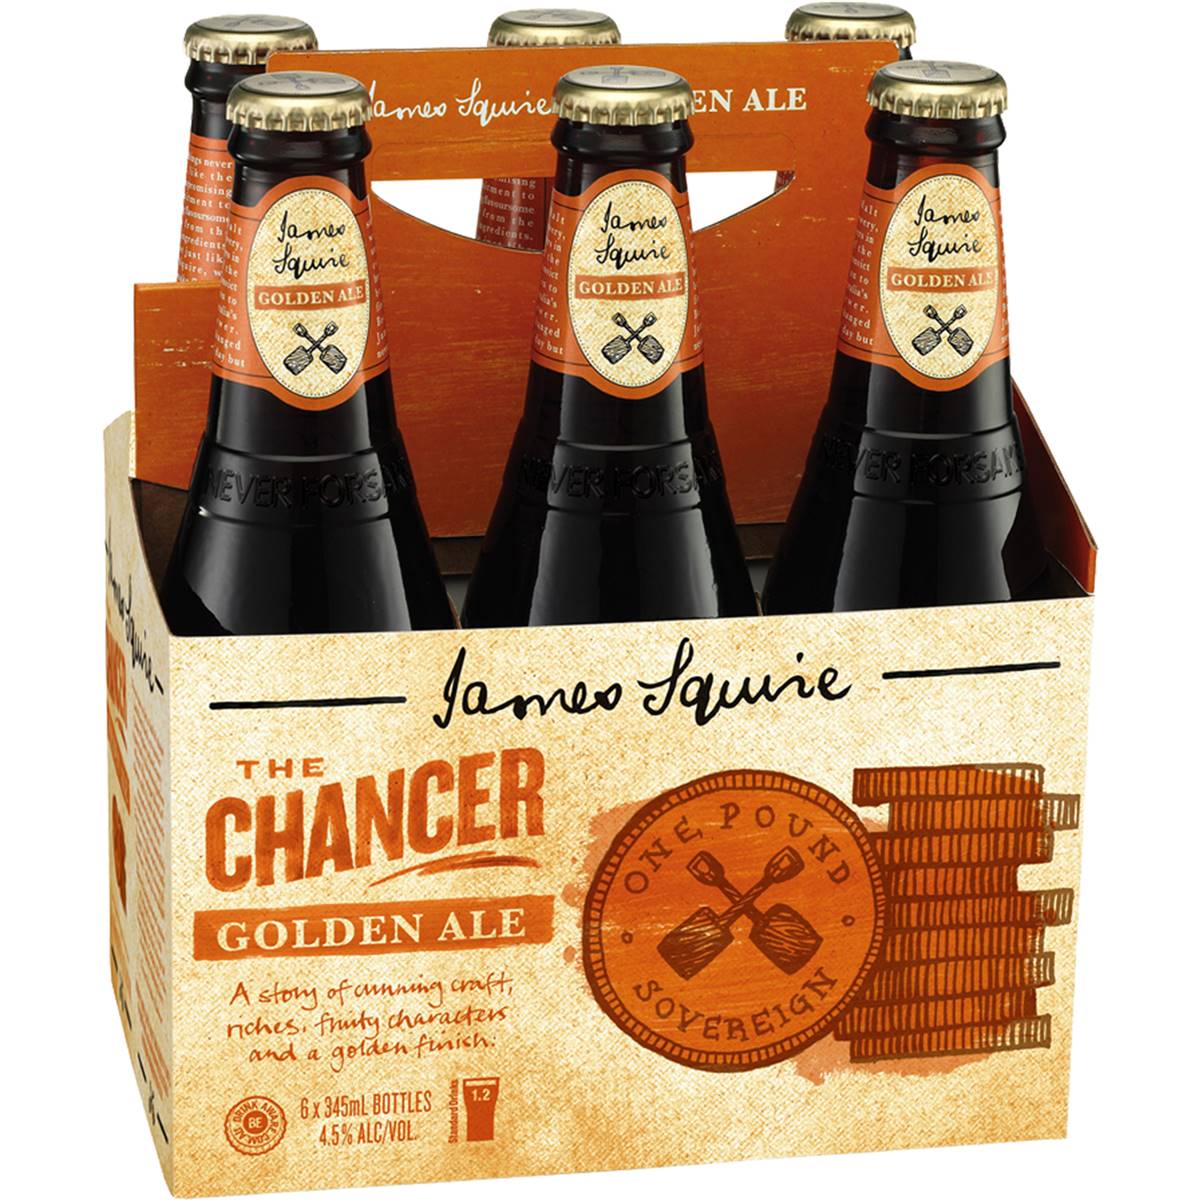 Calories in James Squire The Chancer Golden Ale Bottles